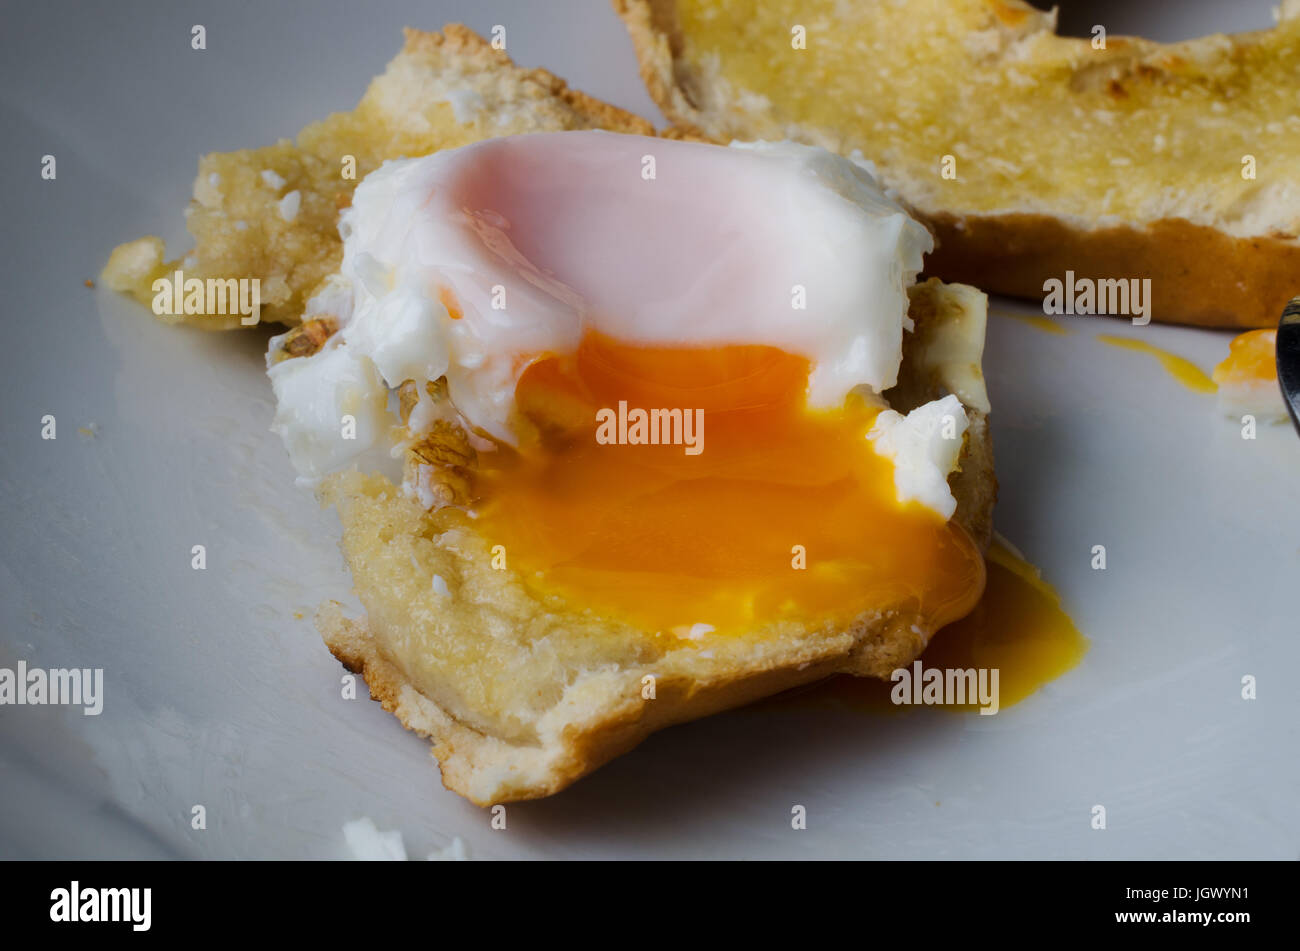 Close up of a partly eaten free range fried egg on toasted bagel with yolk seeping over the edge.  Remaining half bagel in background. Stock Photo